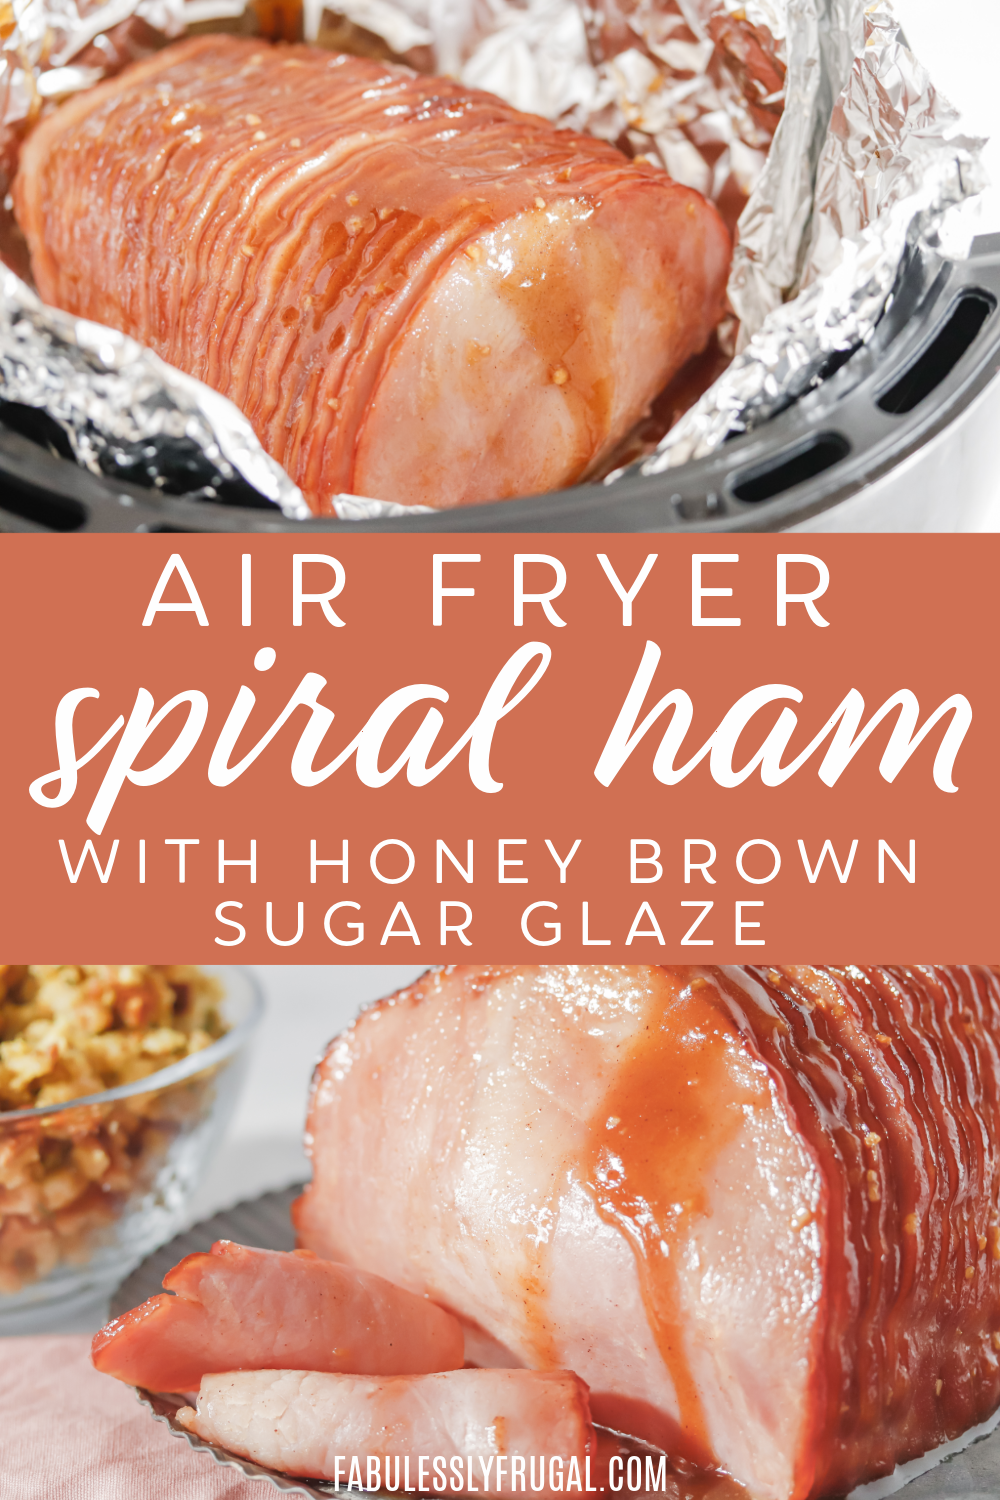 You will love this air fryer ham with a delicious honey brown sugar glaze